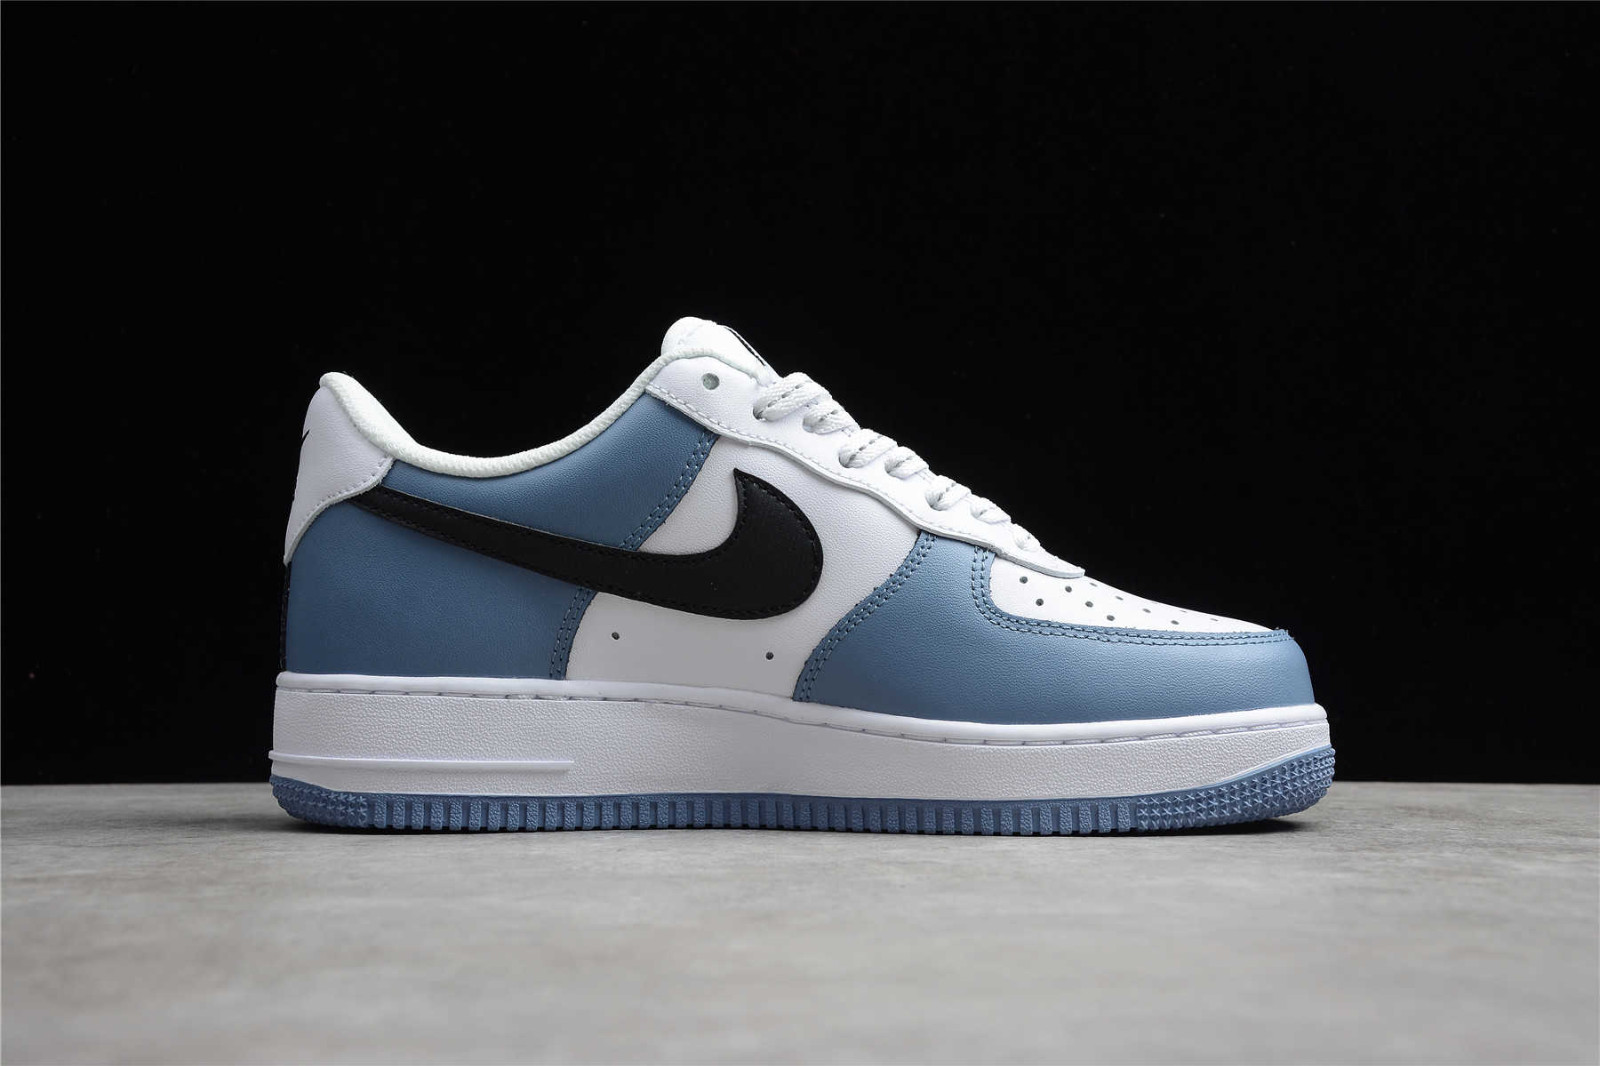 Nike Air Force 1 '07 sneakers in white and blue